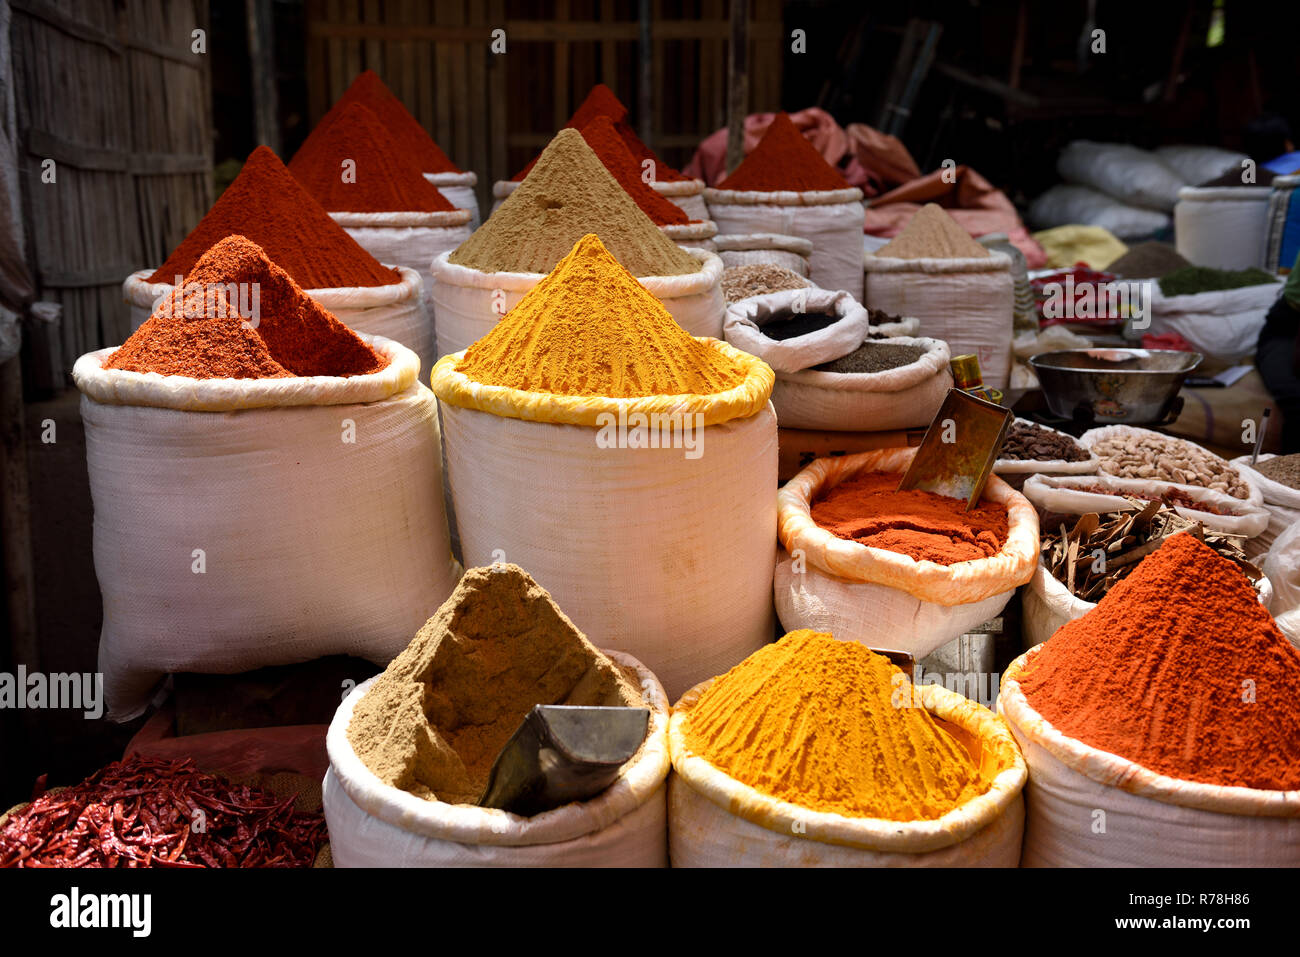 Baskets of fresh raw essential Indian spices, chili, coriander and turmeric powders in a spice market in Jaipur, Rajasthan, India. Stock Photo